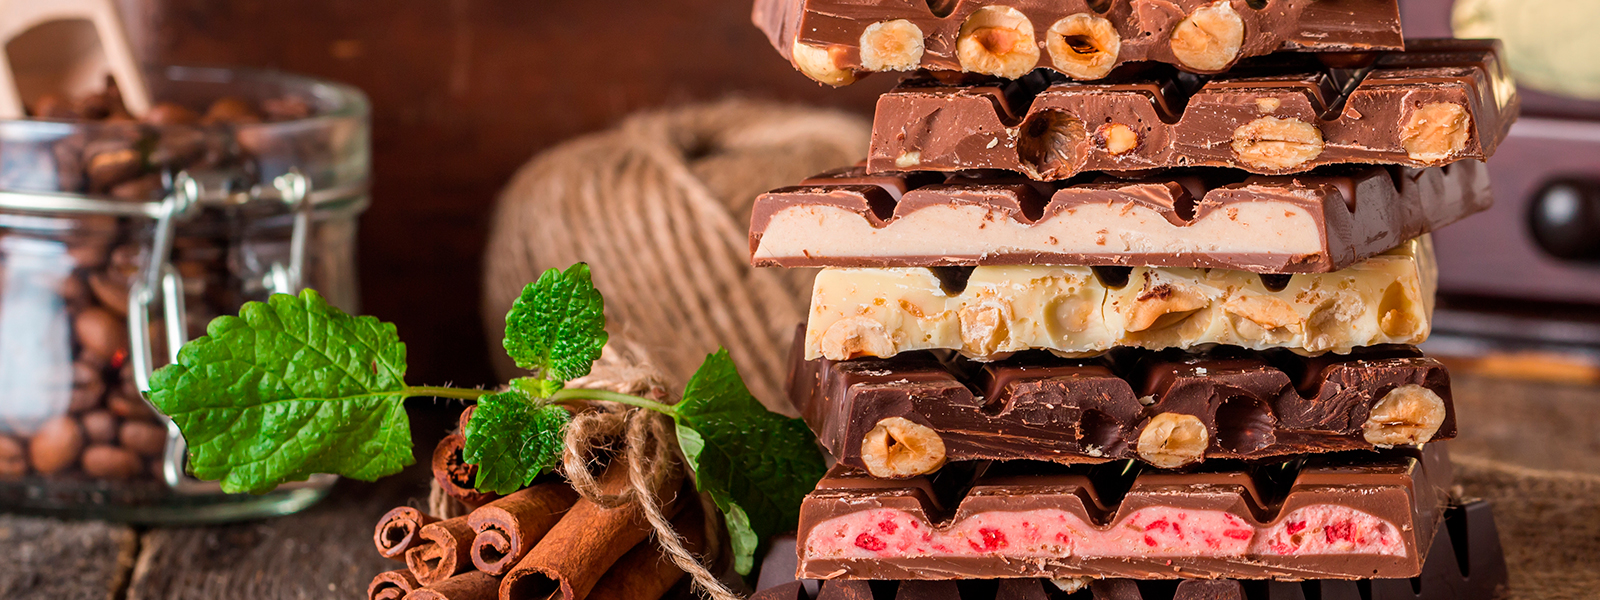 banner-carino-ingredients-chocolate-fillings-inclusions-products